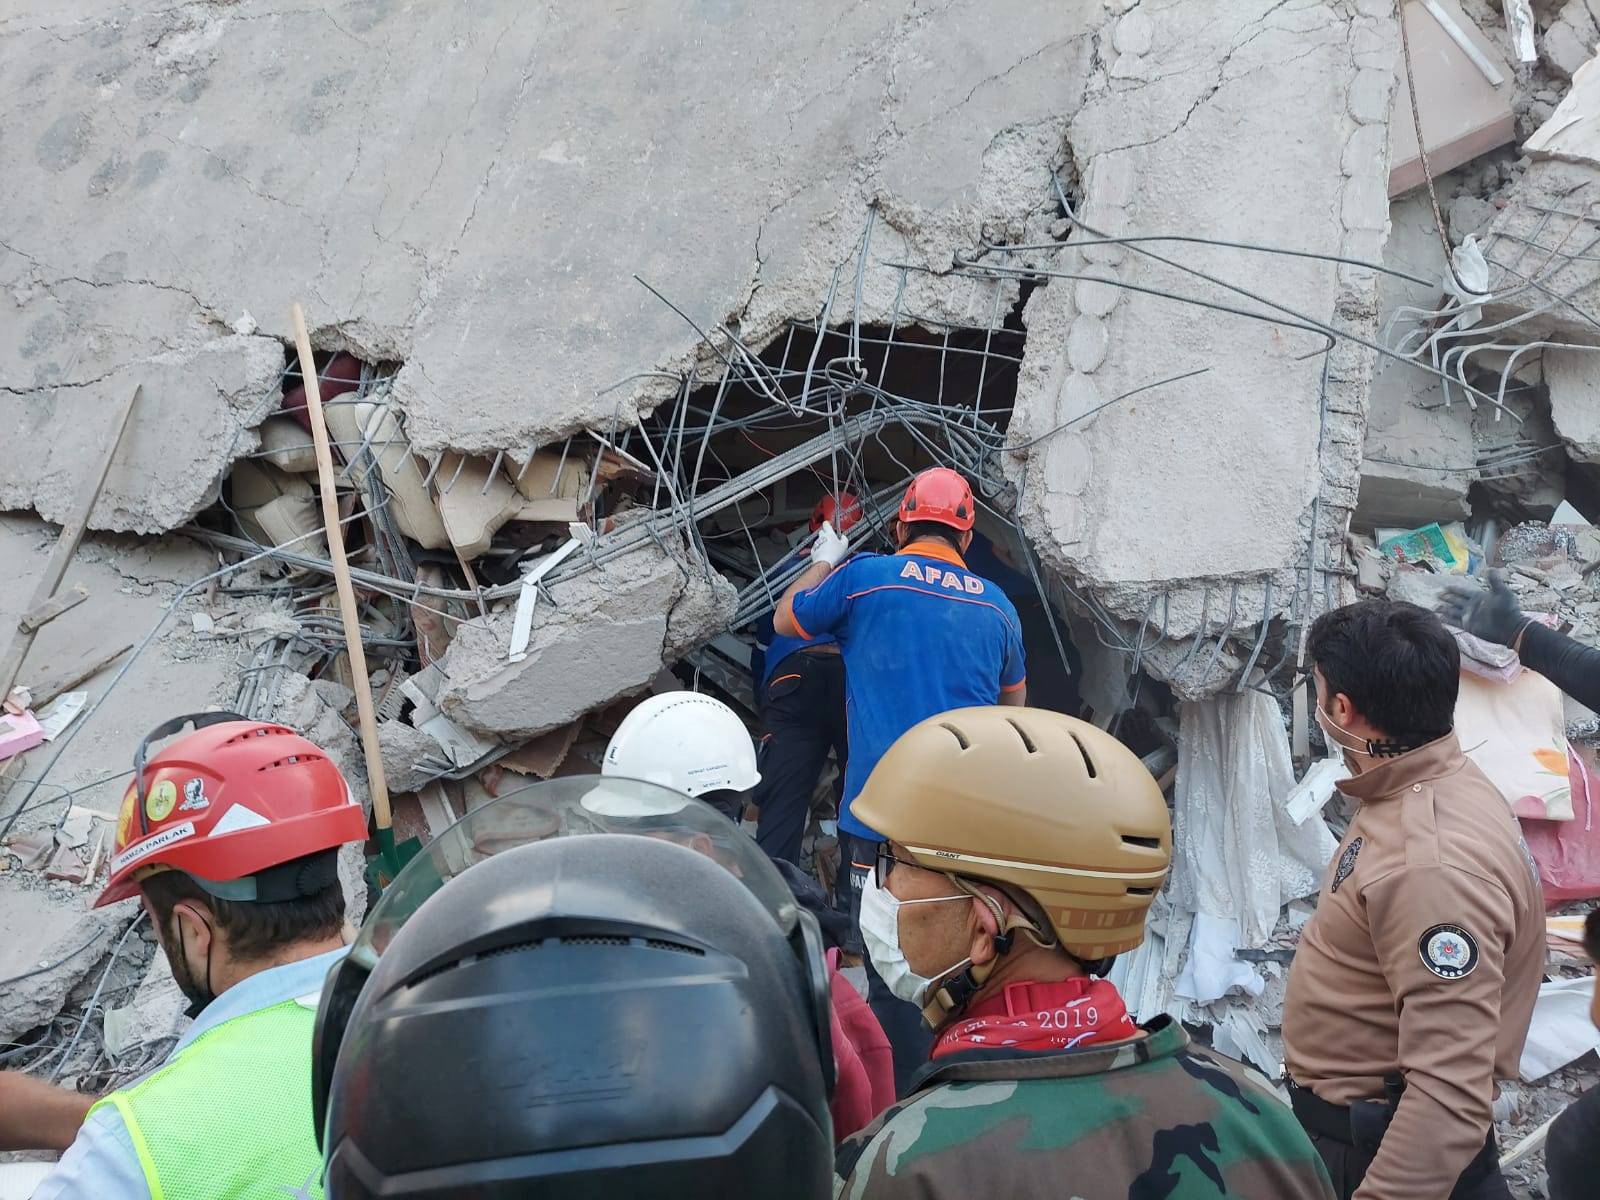 People search for survivors at a collapsed building after a strong earthquake struck the Aegean Sea where some buildings collapsed in the coastal province of Izmir